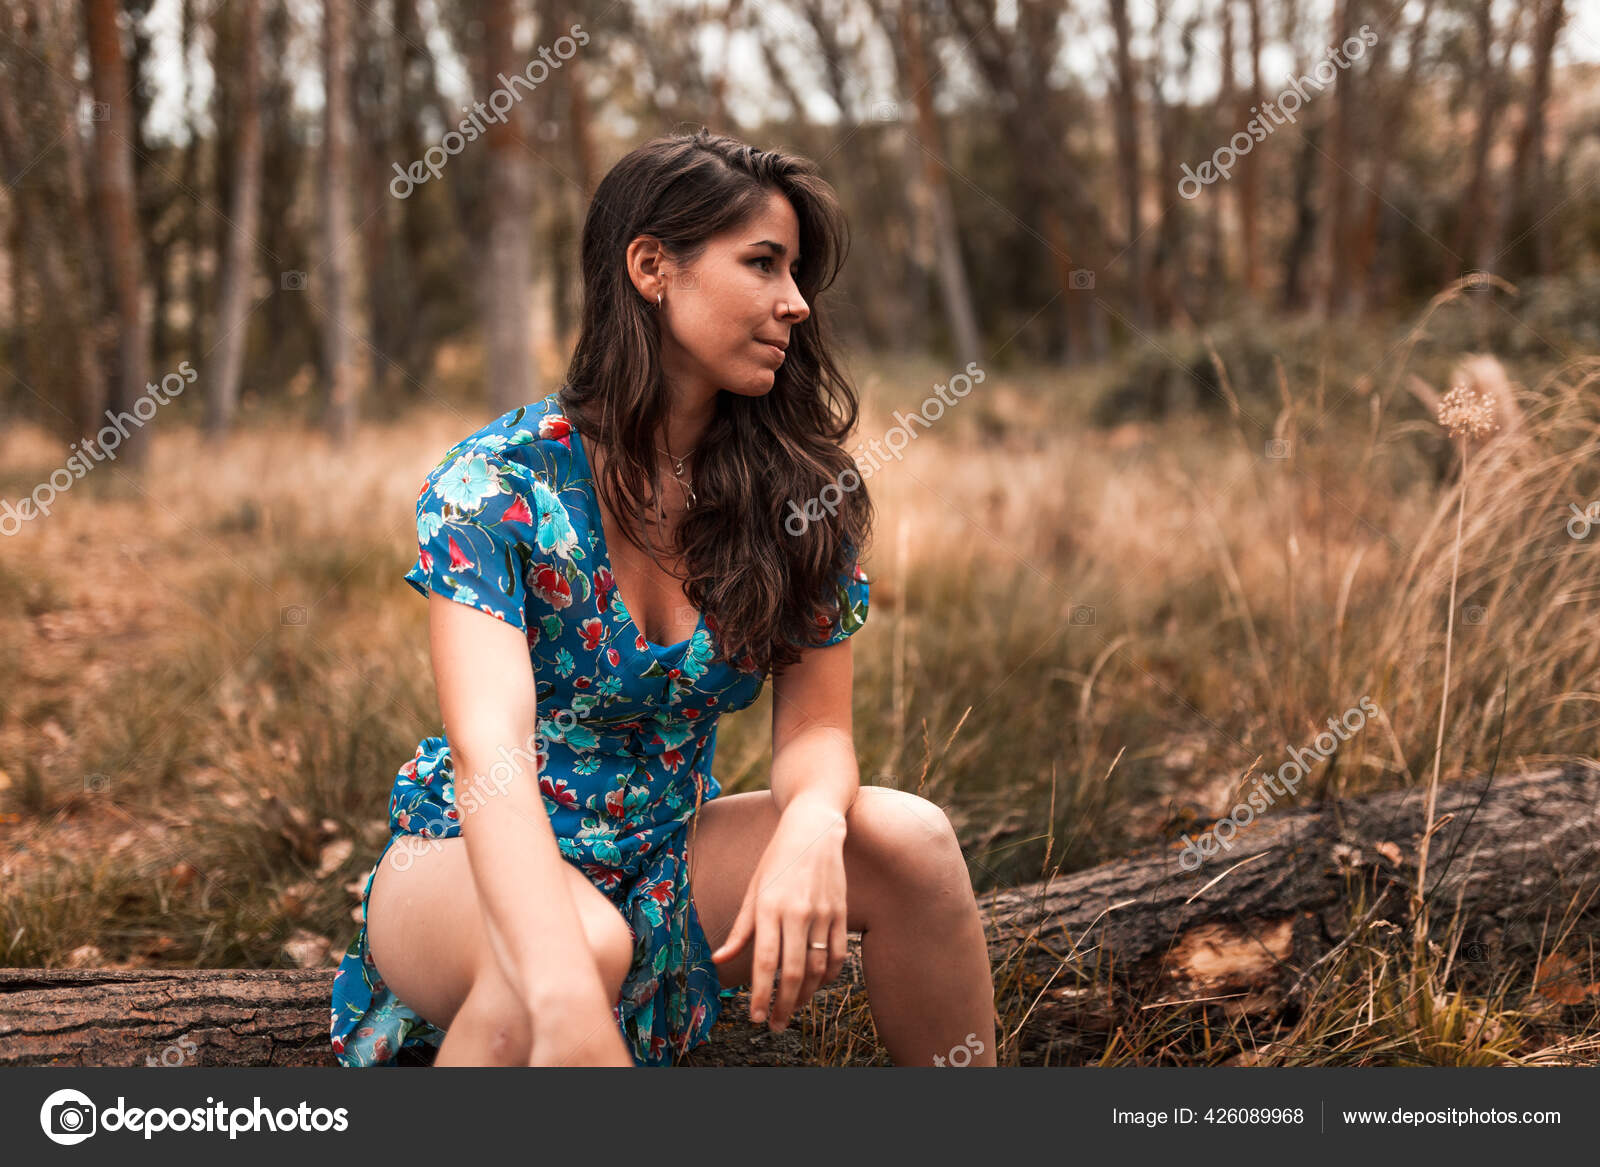 A 35 year old brunette woman in a forest wearing a small top